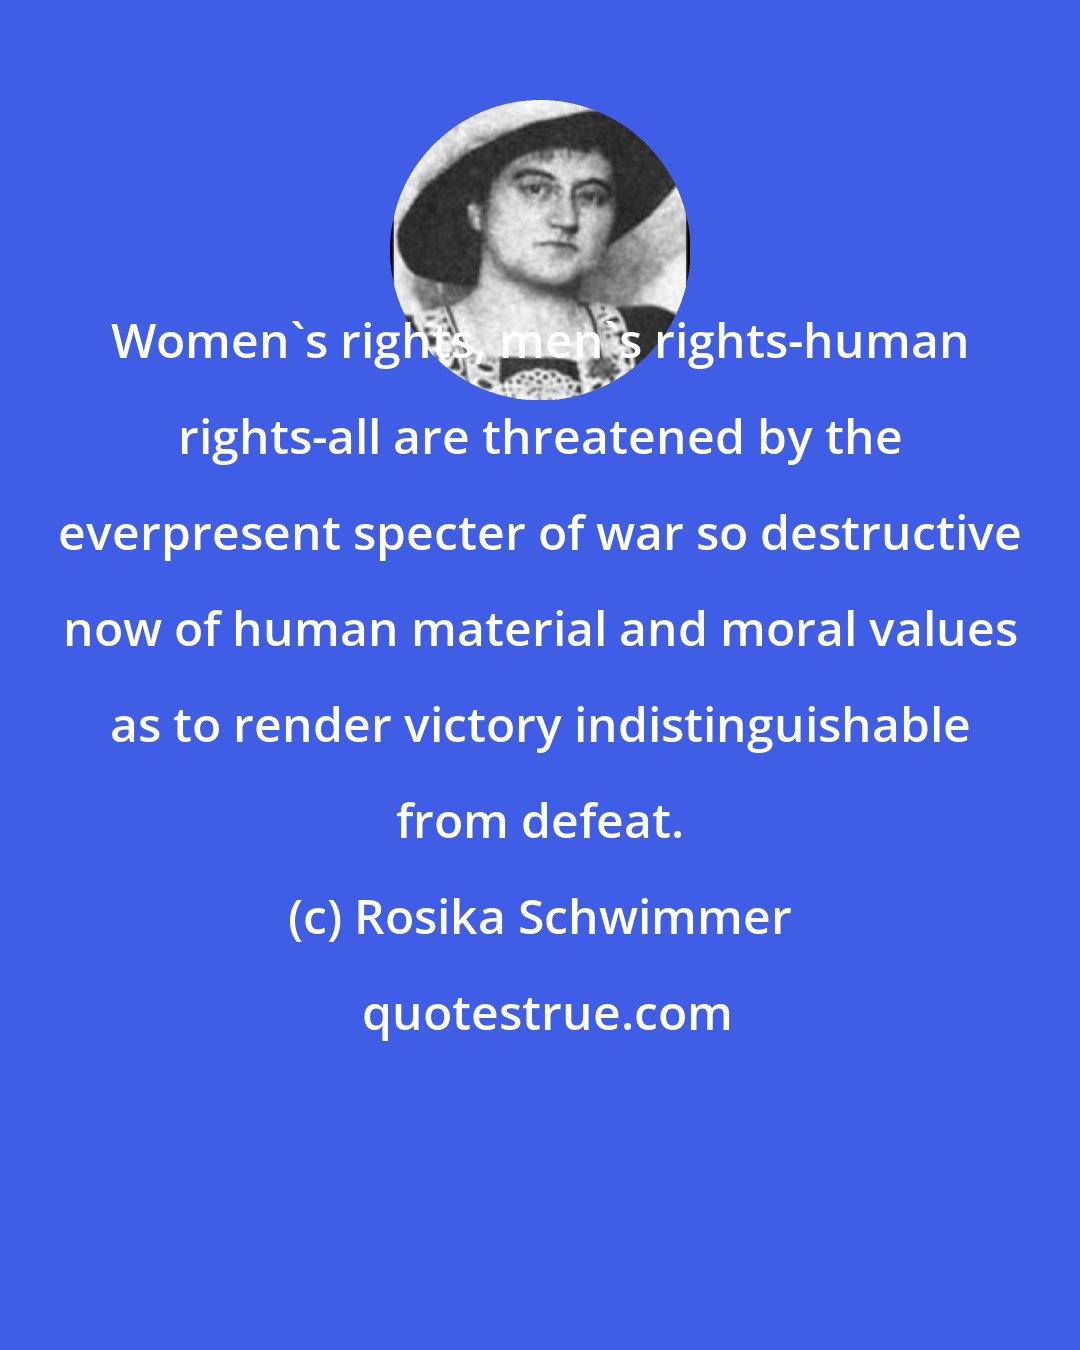 Rosika Schwimmer: Women's rights, men's rights-human rights-all are threatened by the everpresent specter of war so destructive now of human material and moral values as to render victory indistinguishable from defeat.